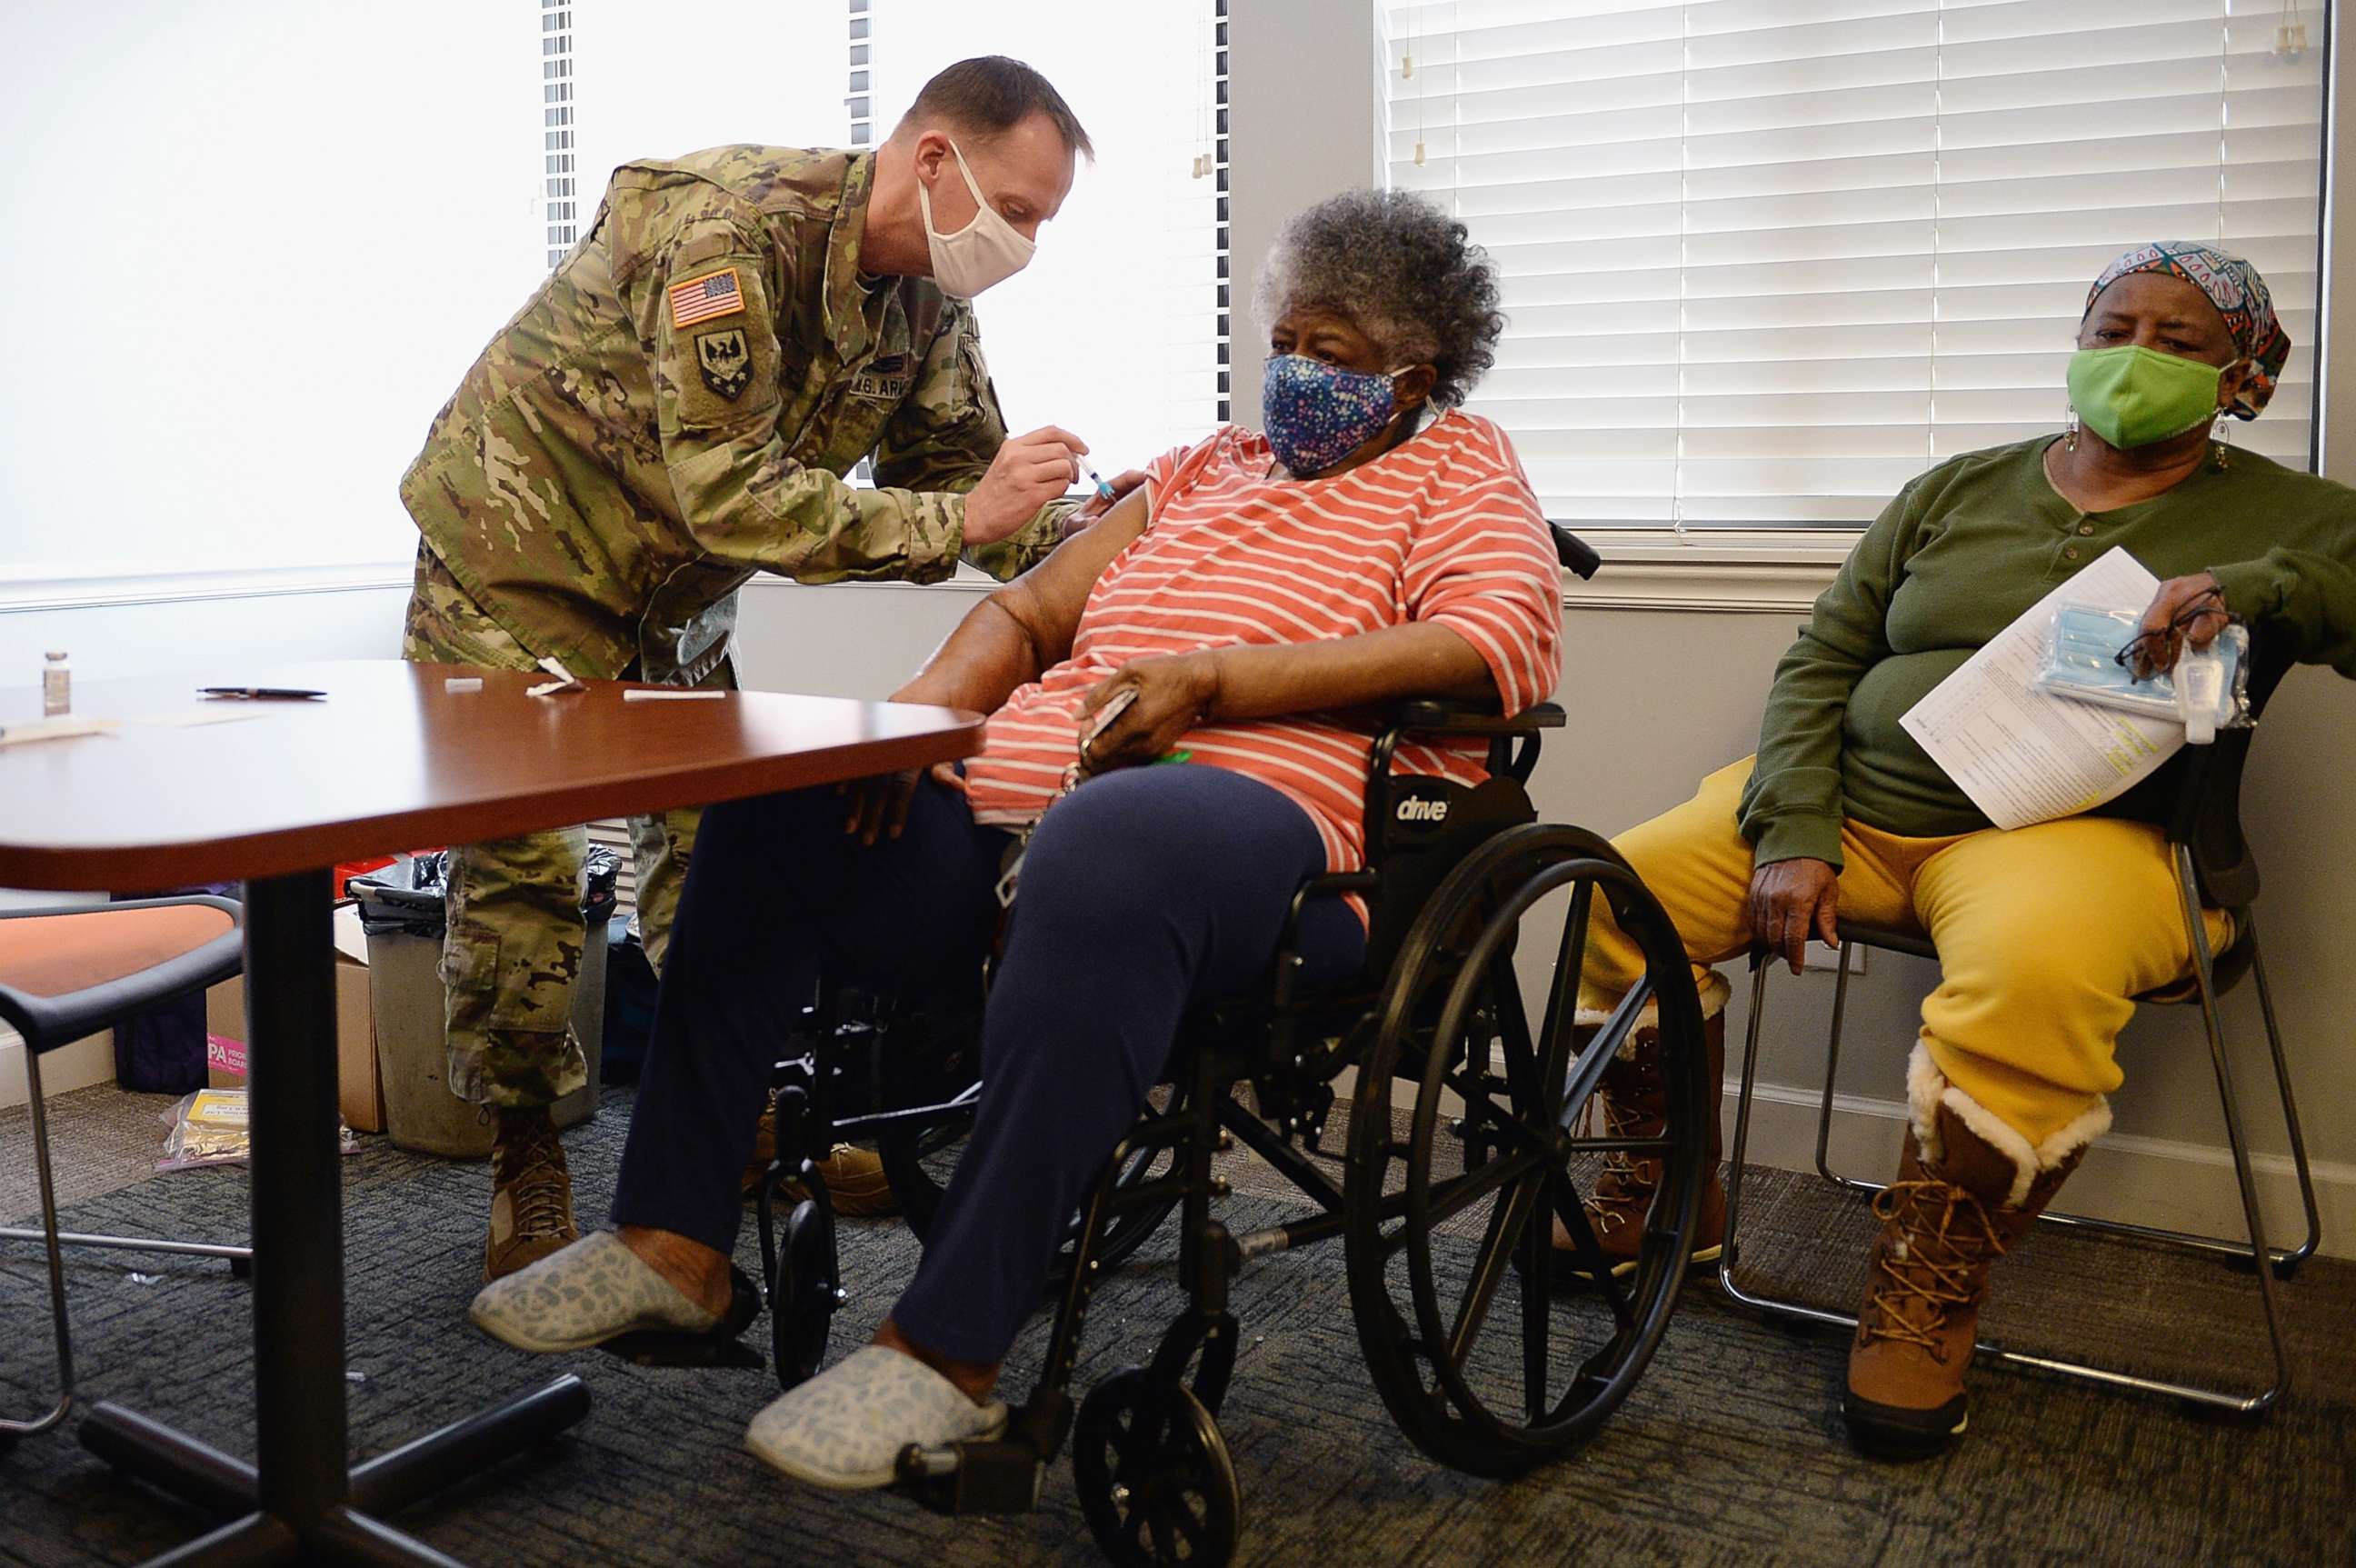 PHOTO: Staff Sergeant Herbert Lins of the Missouri Army National Guard administers the COVID-19 vaccine to a resident during a vaccination event on Feb. 11, 2021 at the Jeff Vander Lou Senior living facility in St Louis, Mo.